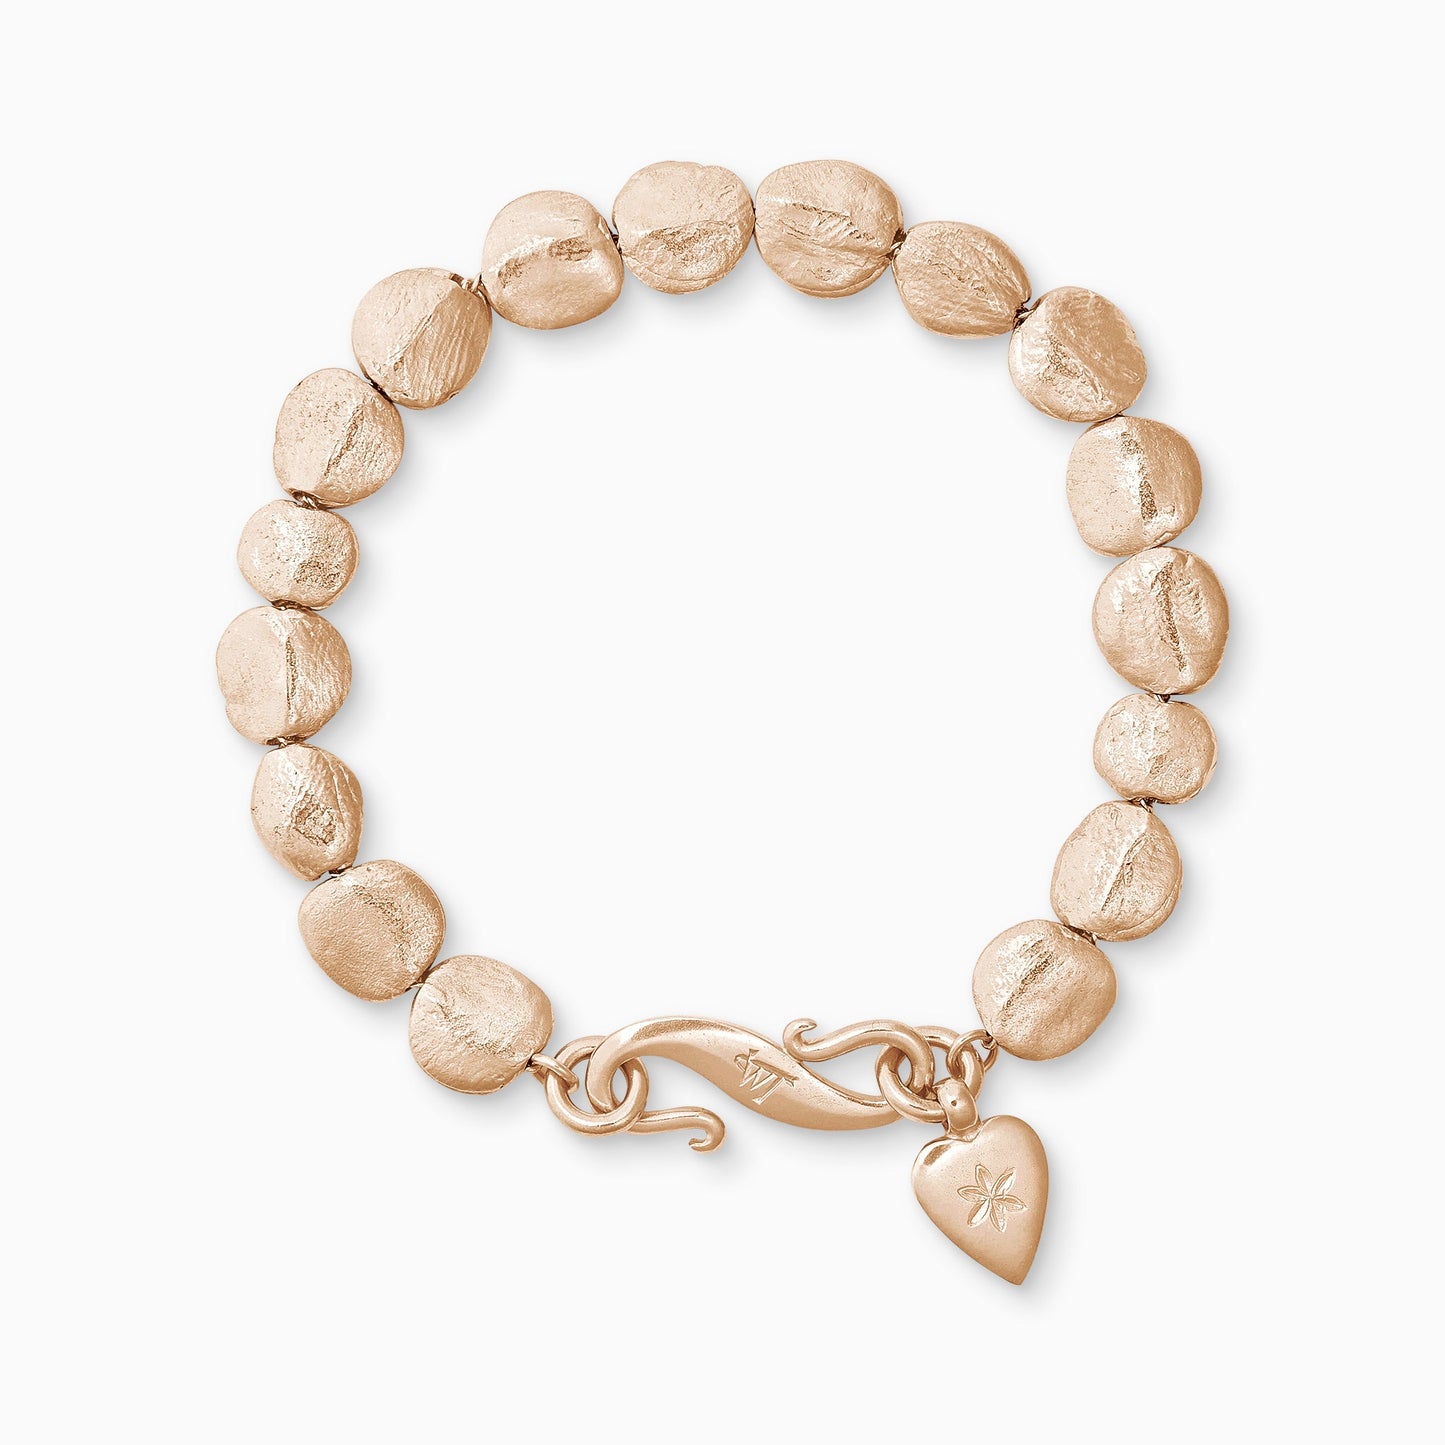 An 18ct Fairtrade rose gold bracelet of handmade textured beads with a smooth heart shaped charm engraved with a 6 petal flower and our signature ’S’ clasp. Bracelet length 210mm. Beads varying from approximately 7mm x 4mm to 10mm x 11mm